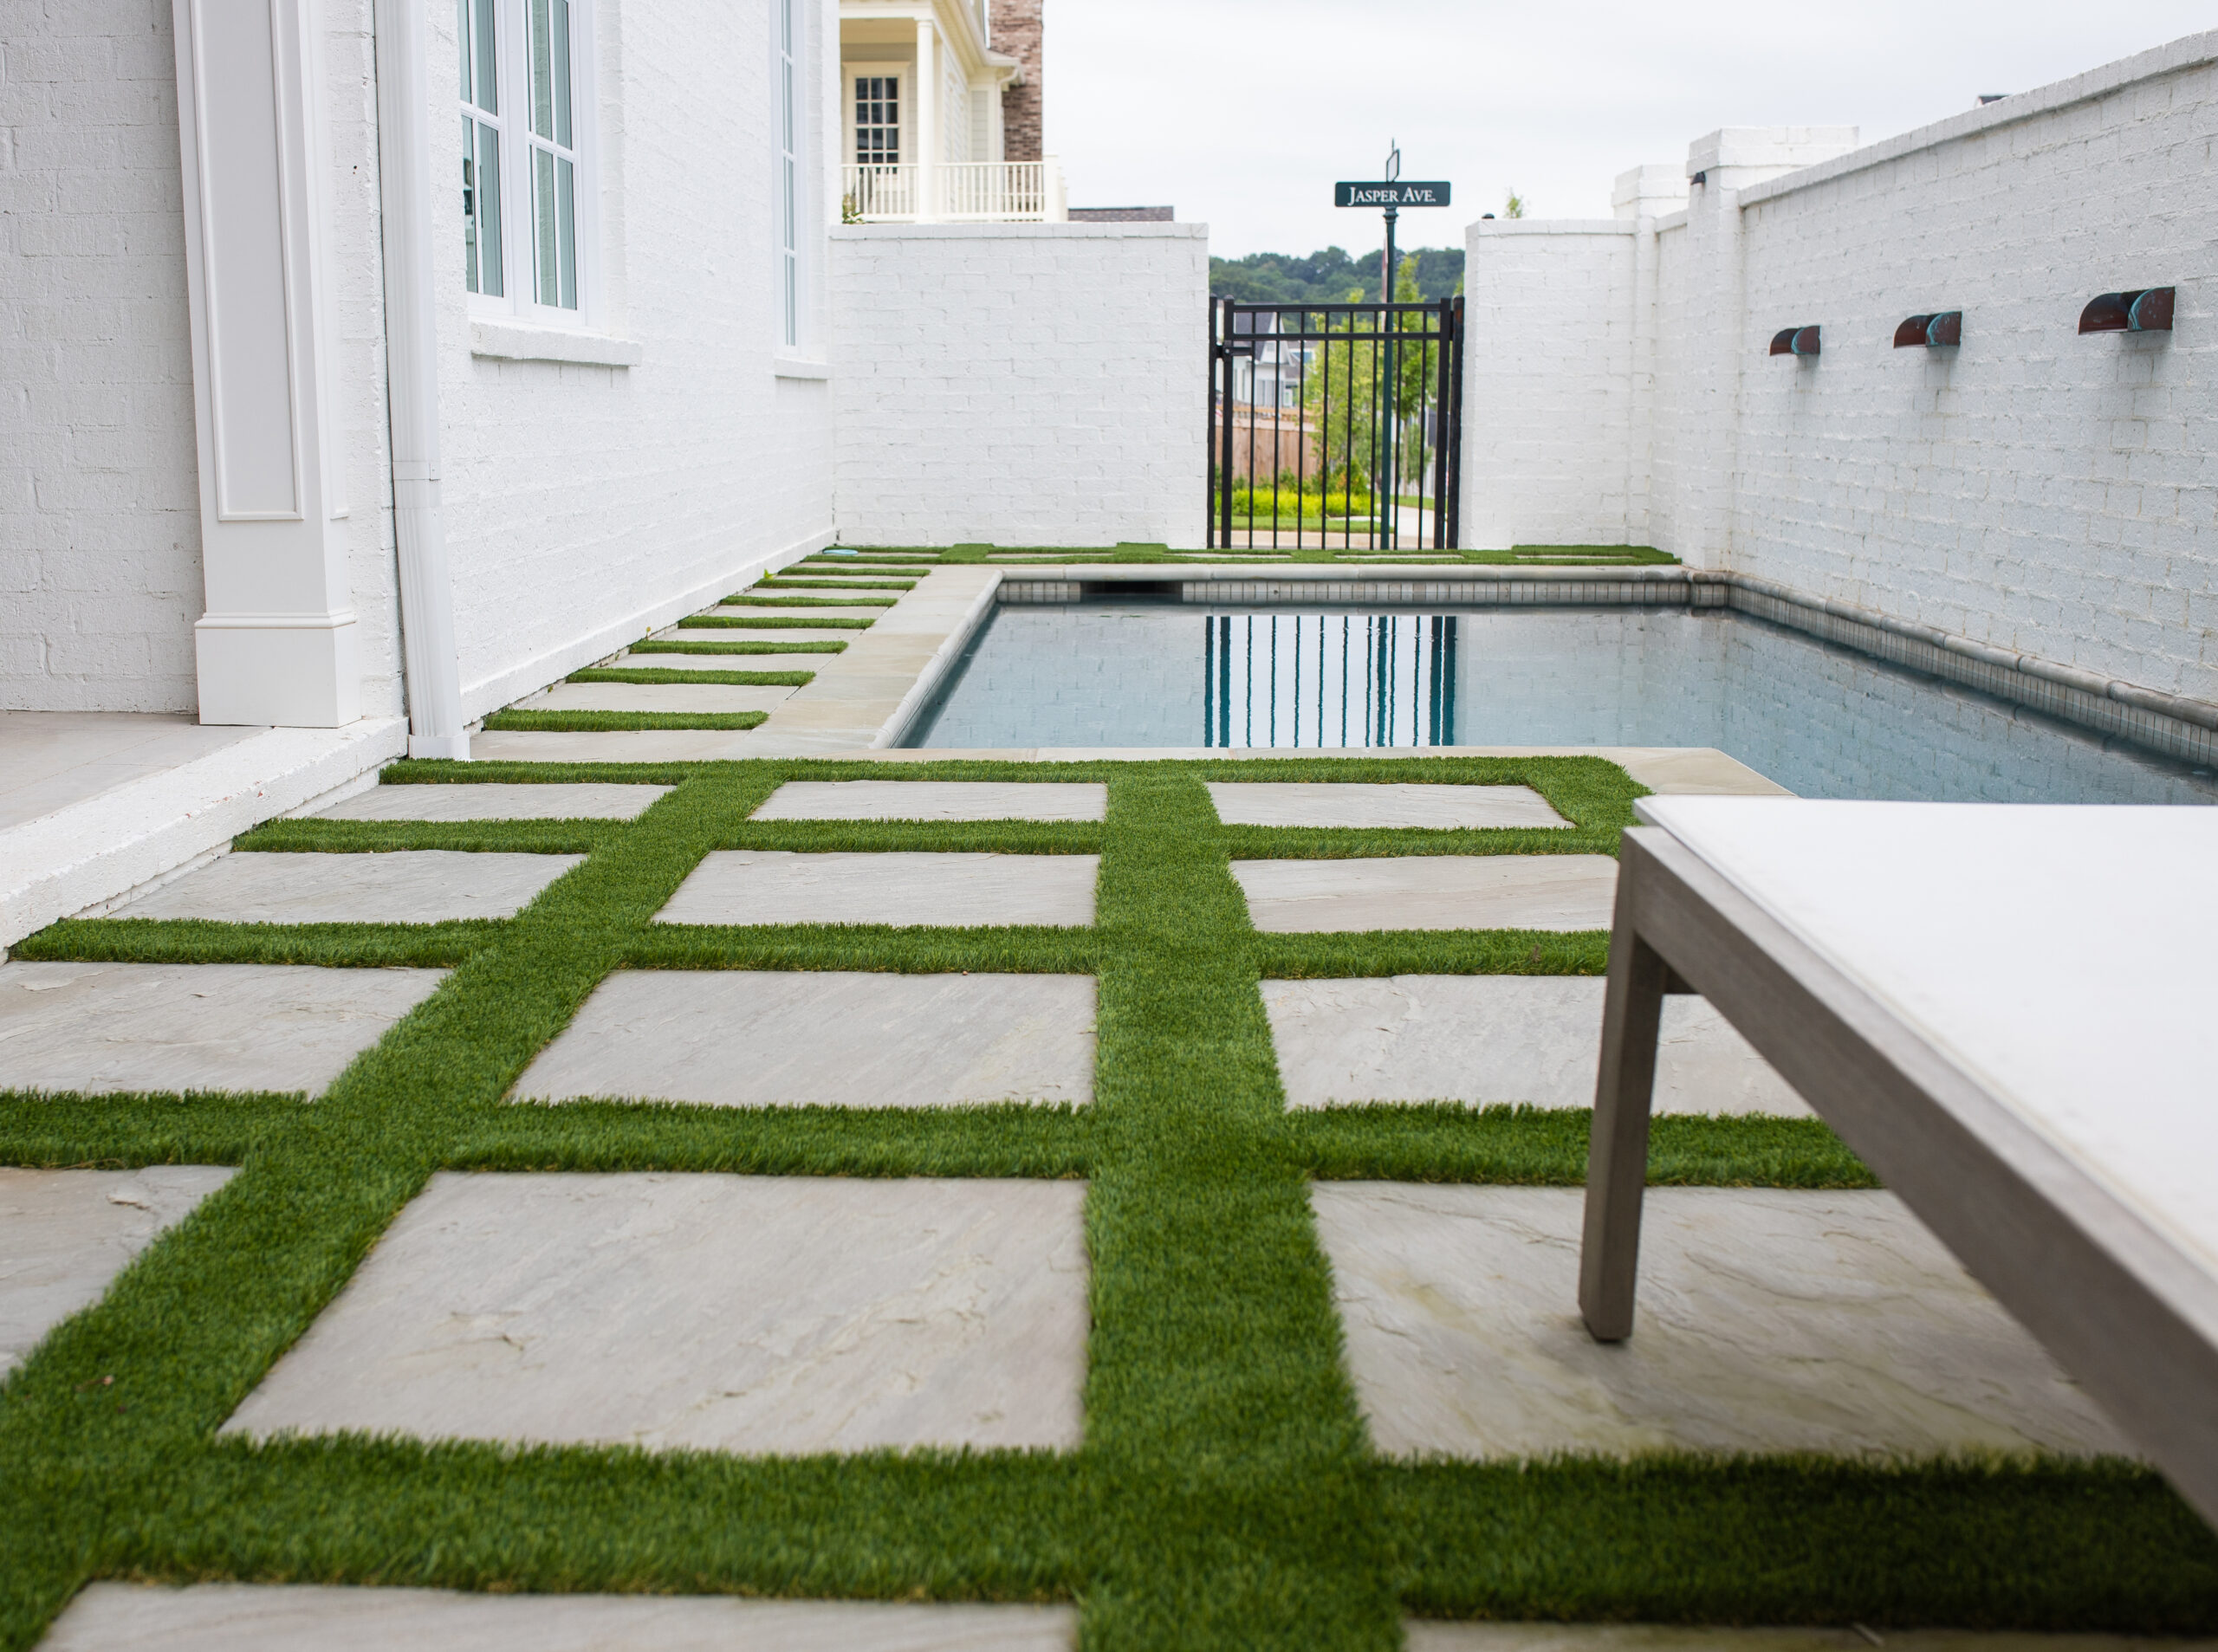 synthetic turf installed around tiles in a small yard